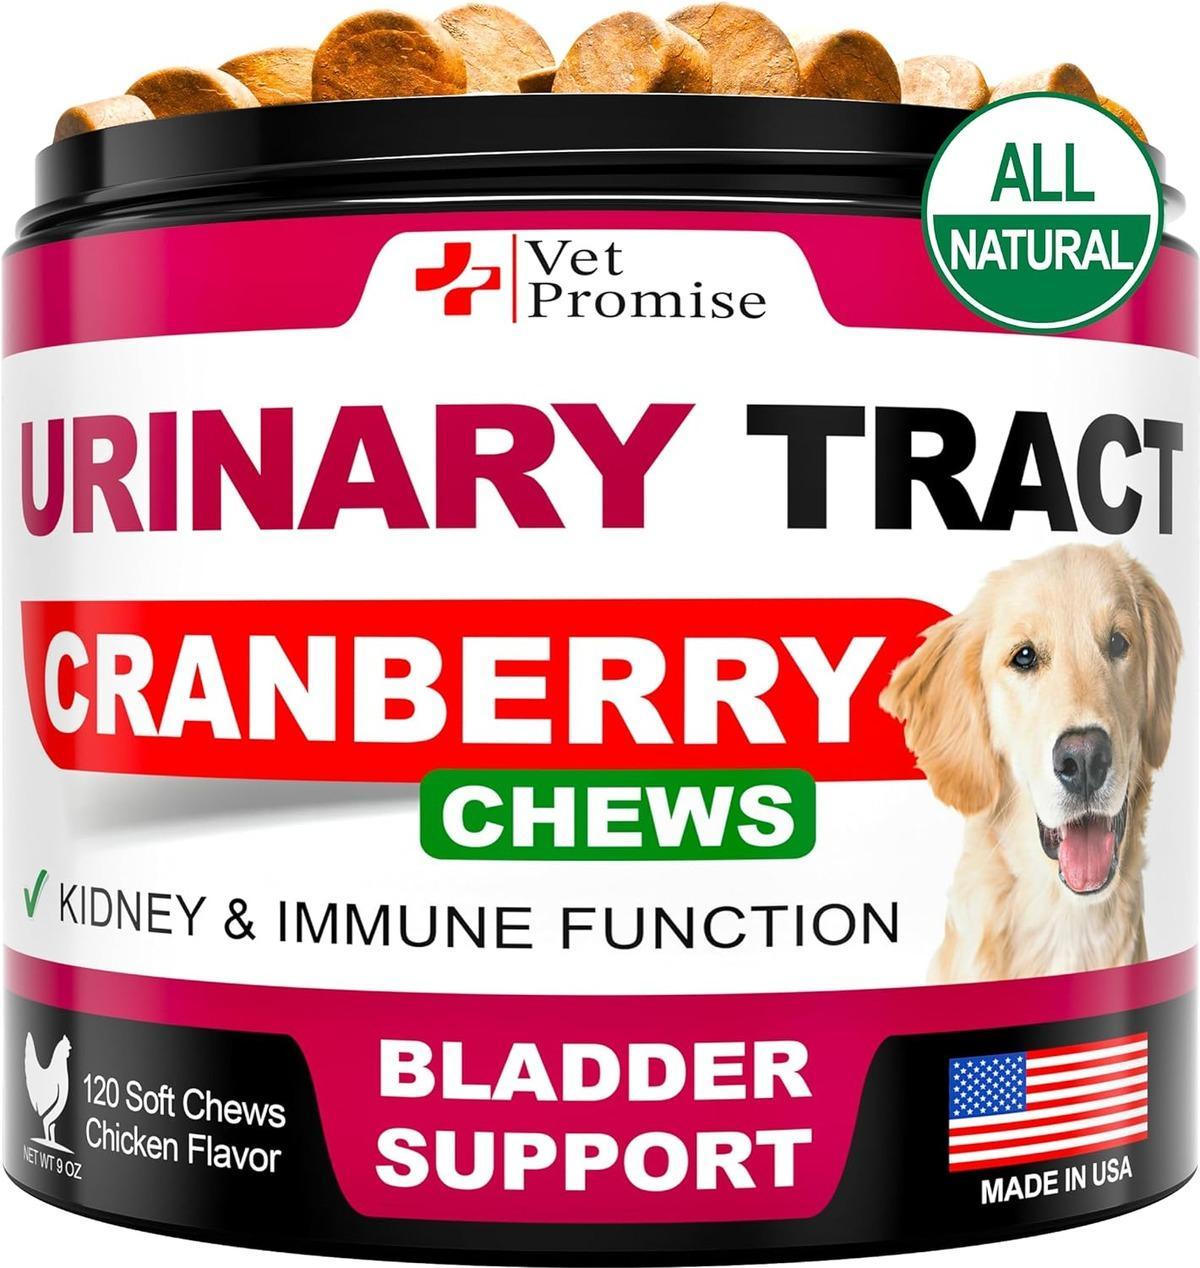 Dog UTI Treatment - Cranberry Supplement for Dogs UTI - Bladder Control for Dogs - Dog Urinary Tract Infection Treatment - UTI Medicine for Dogs - Dog Cranberry Supplement Vitamins Multivitamin Chews